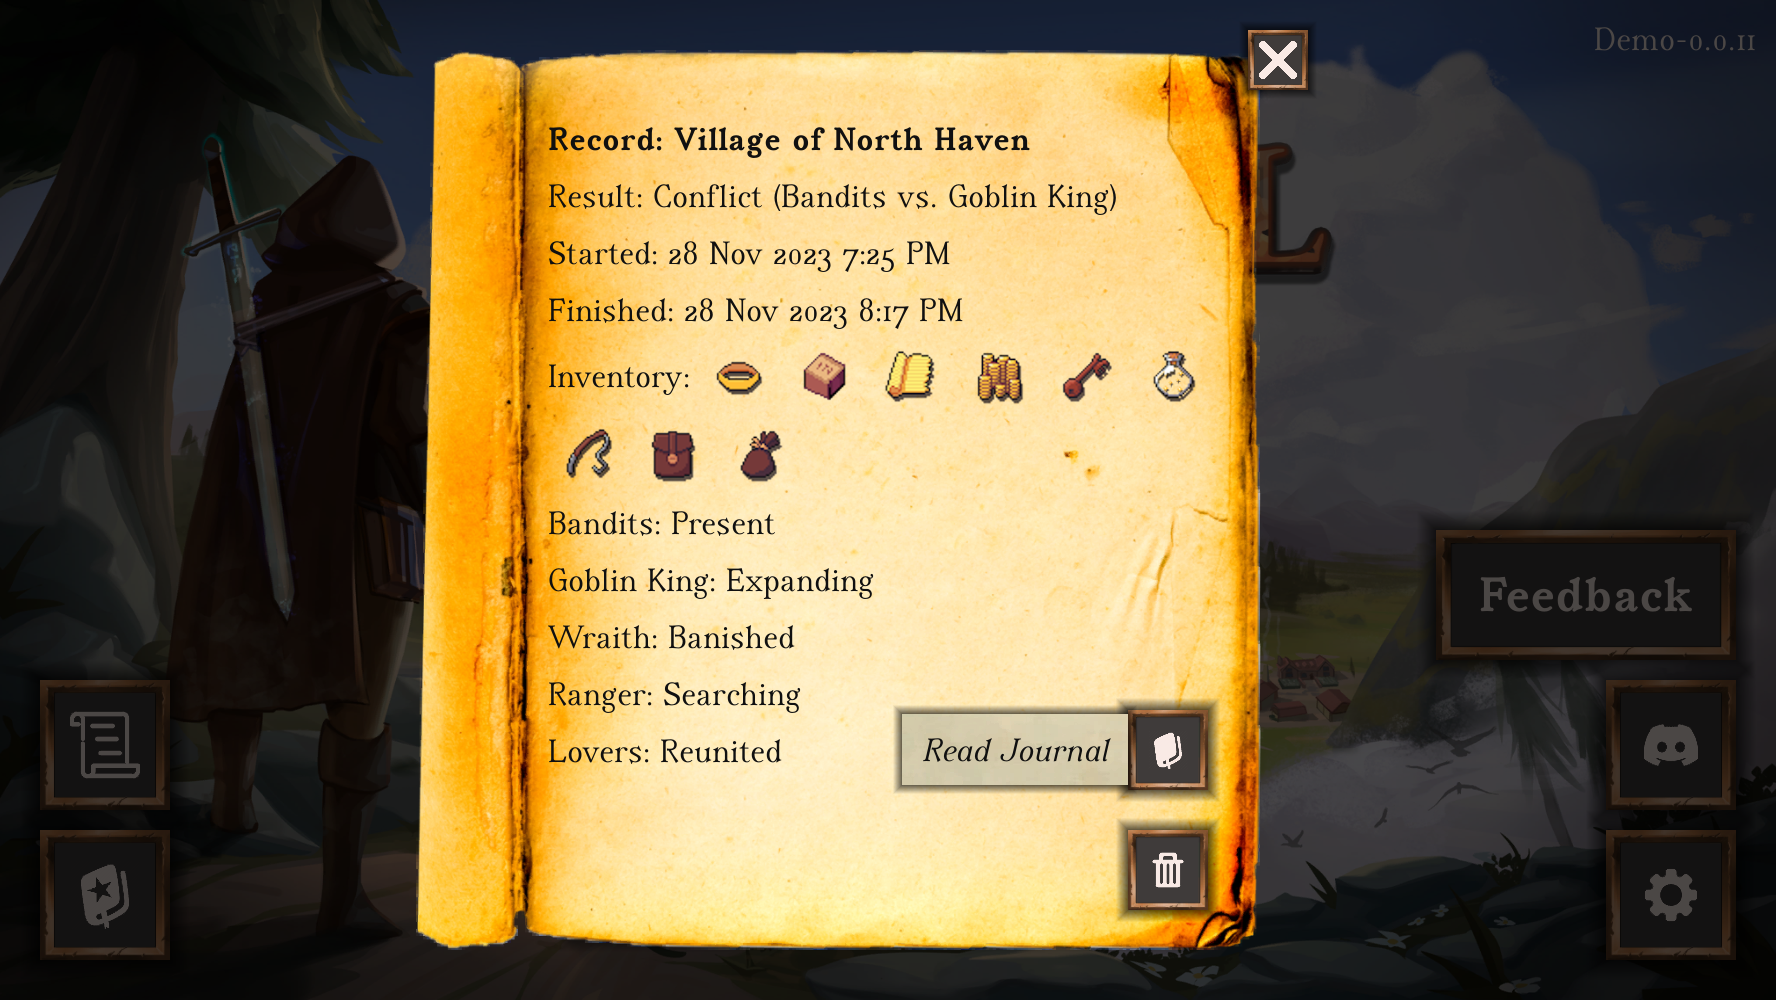 Screenshot of an adventure Record. It says: Record: Village of North Haven, Result: Conflict (Bandits vs. Goblin King), a start and finish time, a list of items in the inventory, Bandits: Present, Goblin King: Expanding, Wraith: Banished, Ranger: Searching, Lovers: Reunited. There’s a button that says Read Journal and a button below it with a trash can icon.